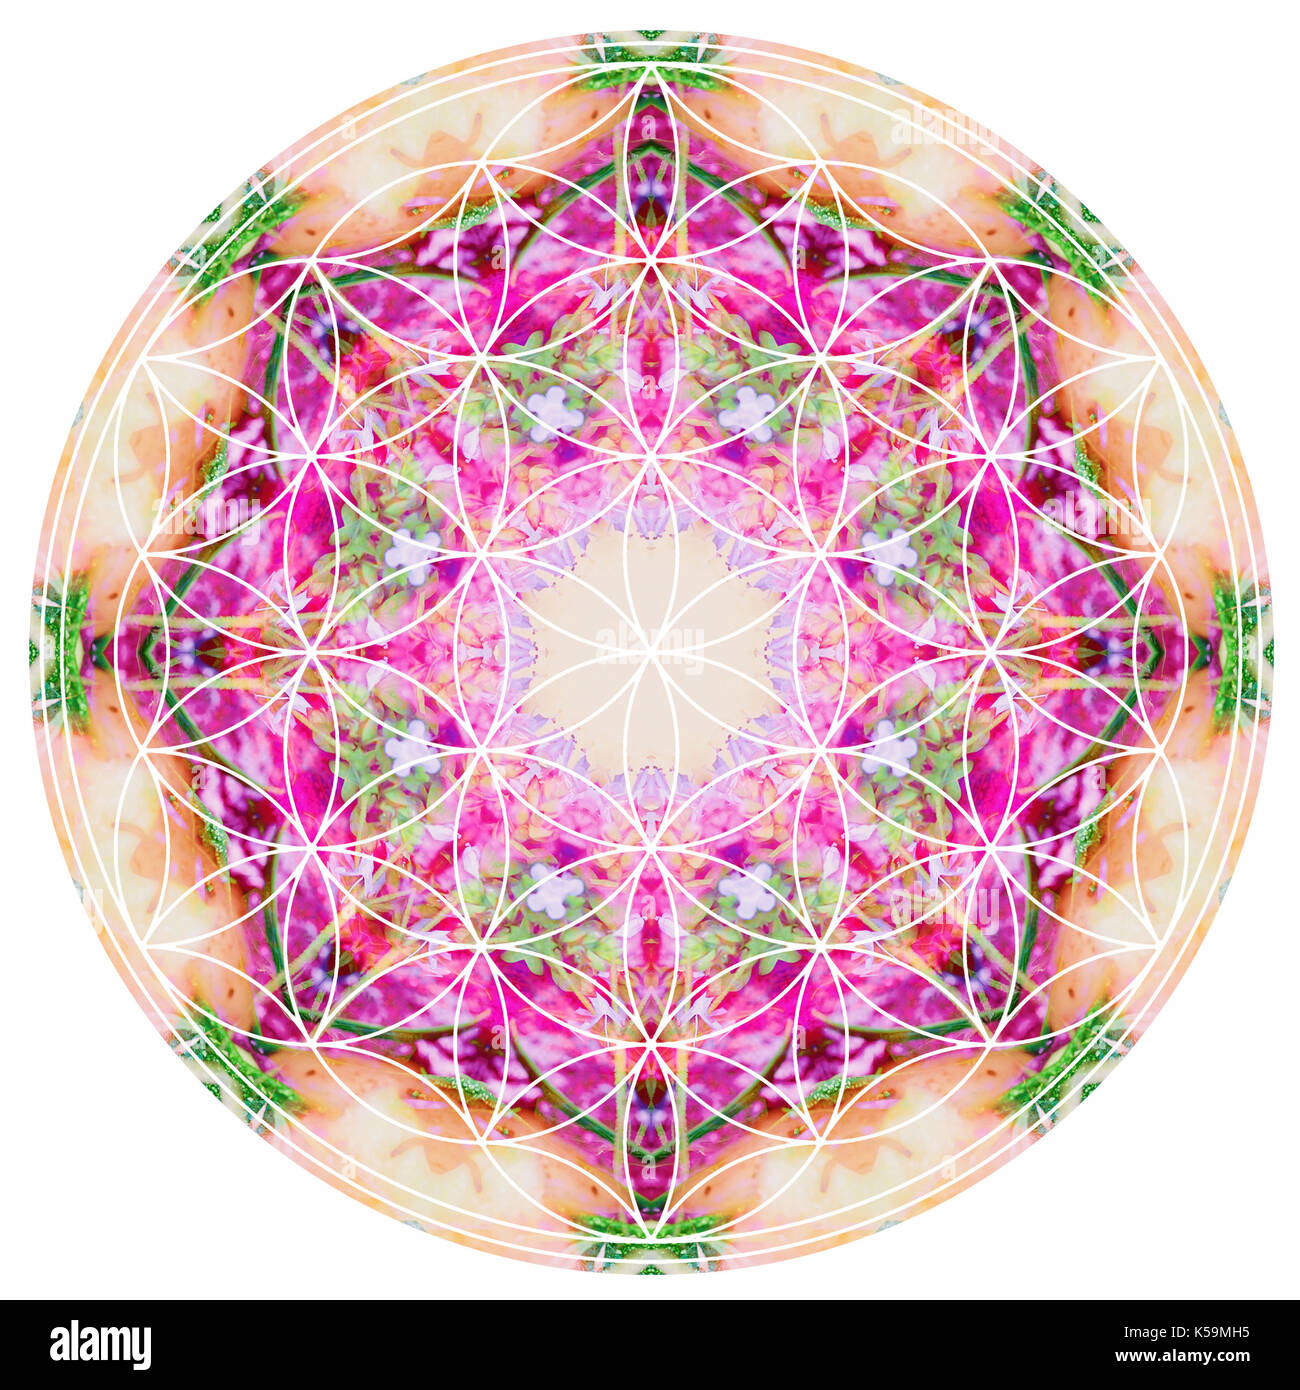 Abstract mandala picture with fresh colorful healing power and flower of life sacred geometry Stock Photo